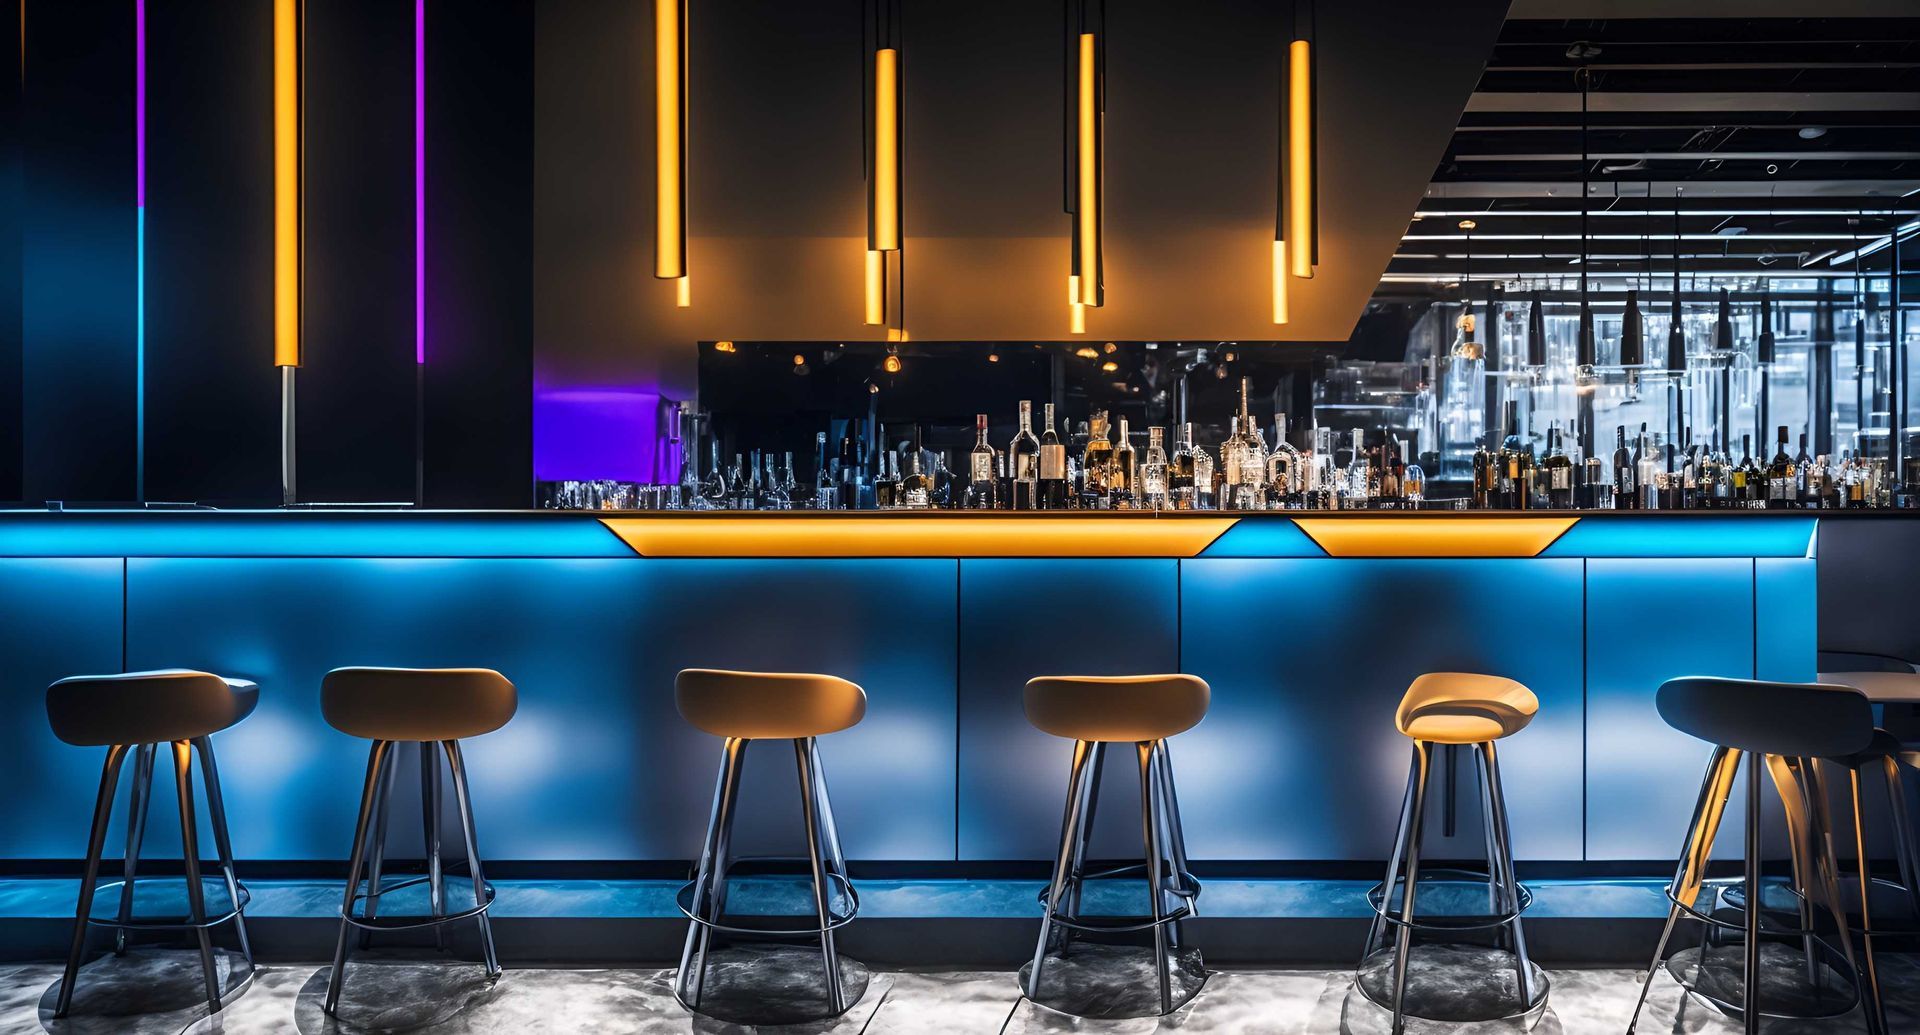 Commercial photograph of a cool bar lit up